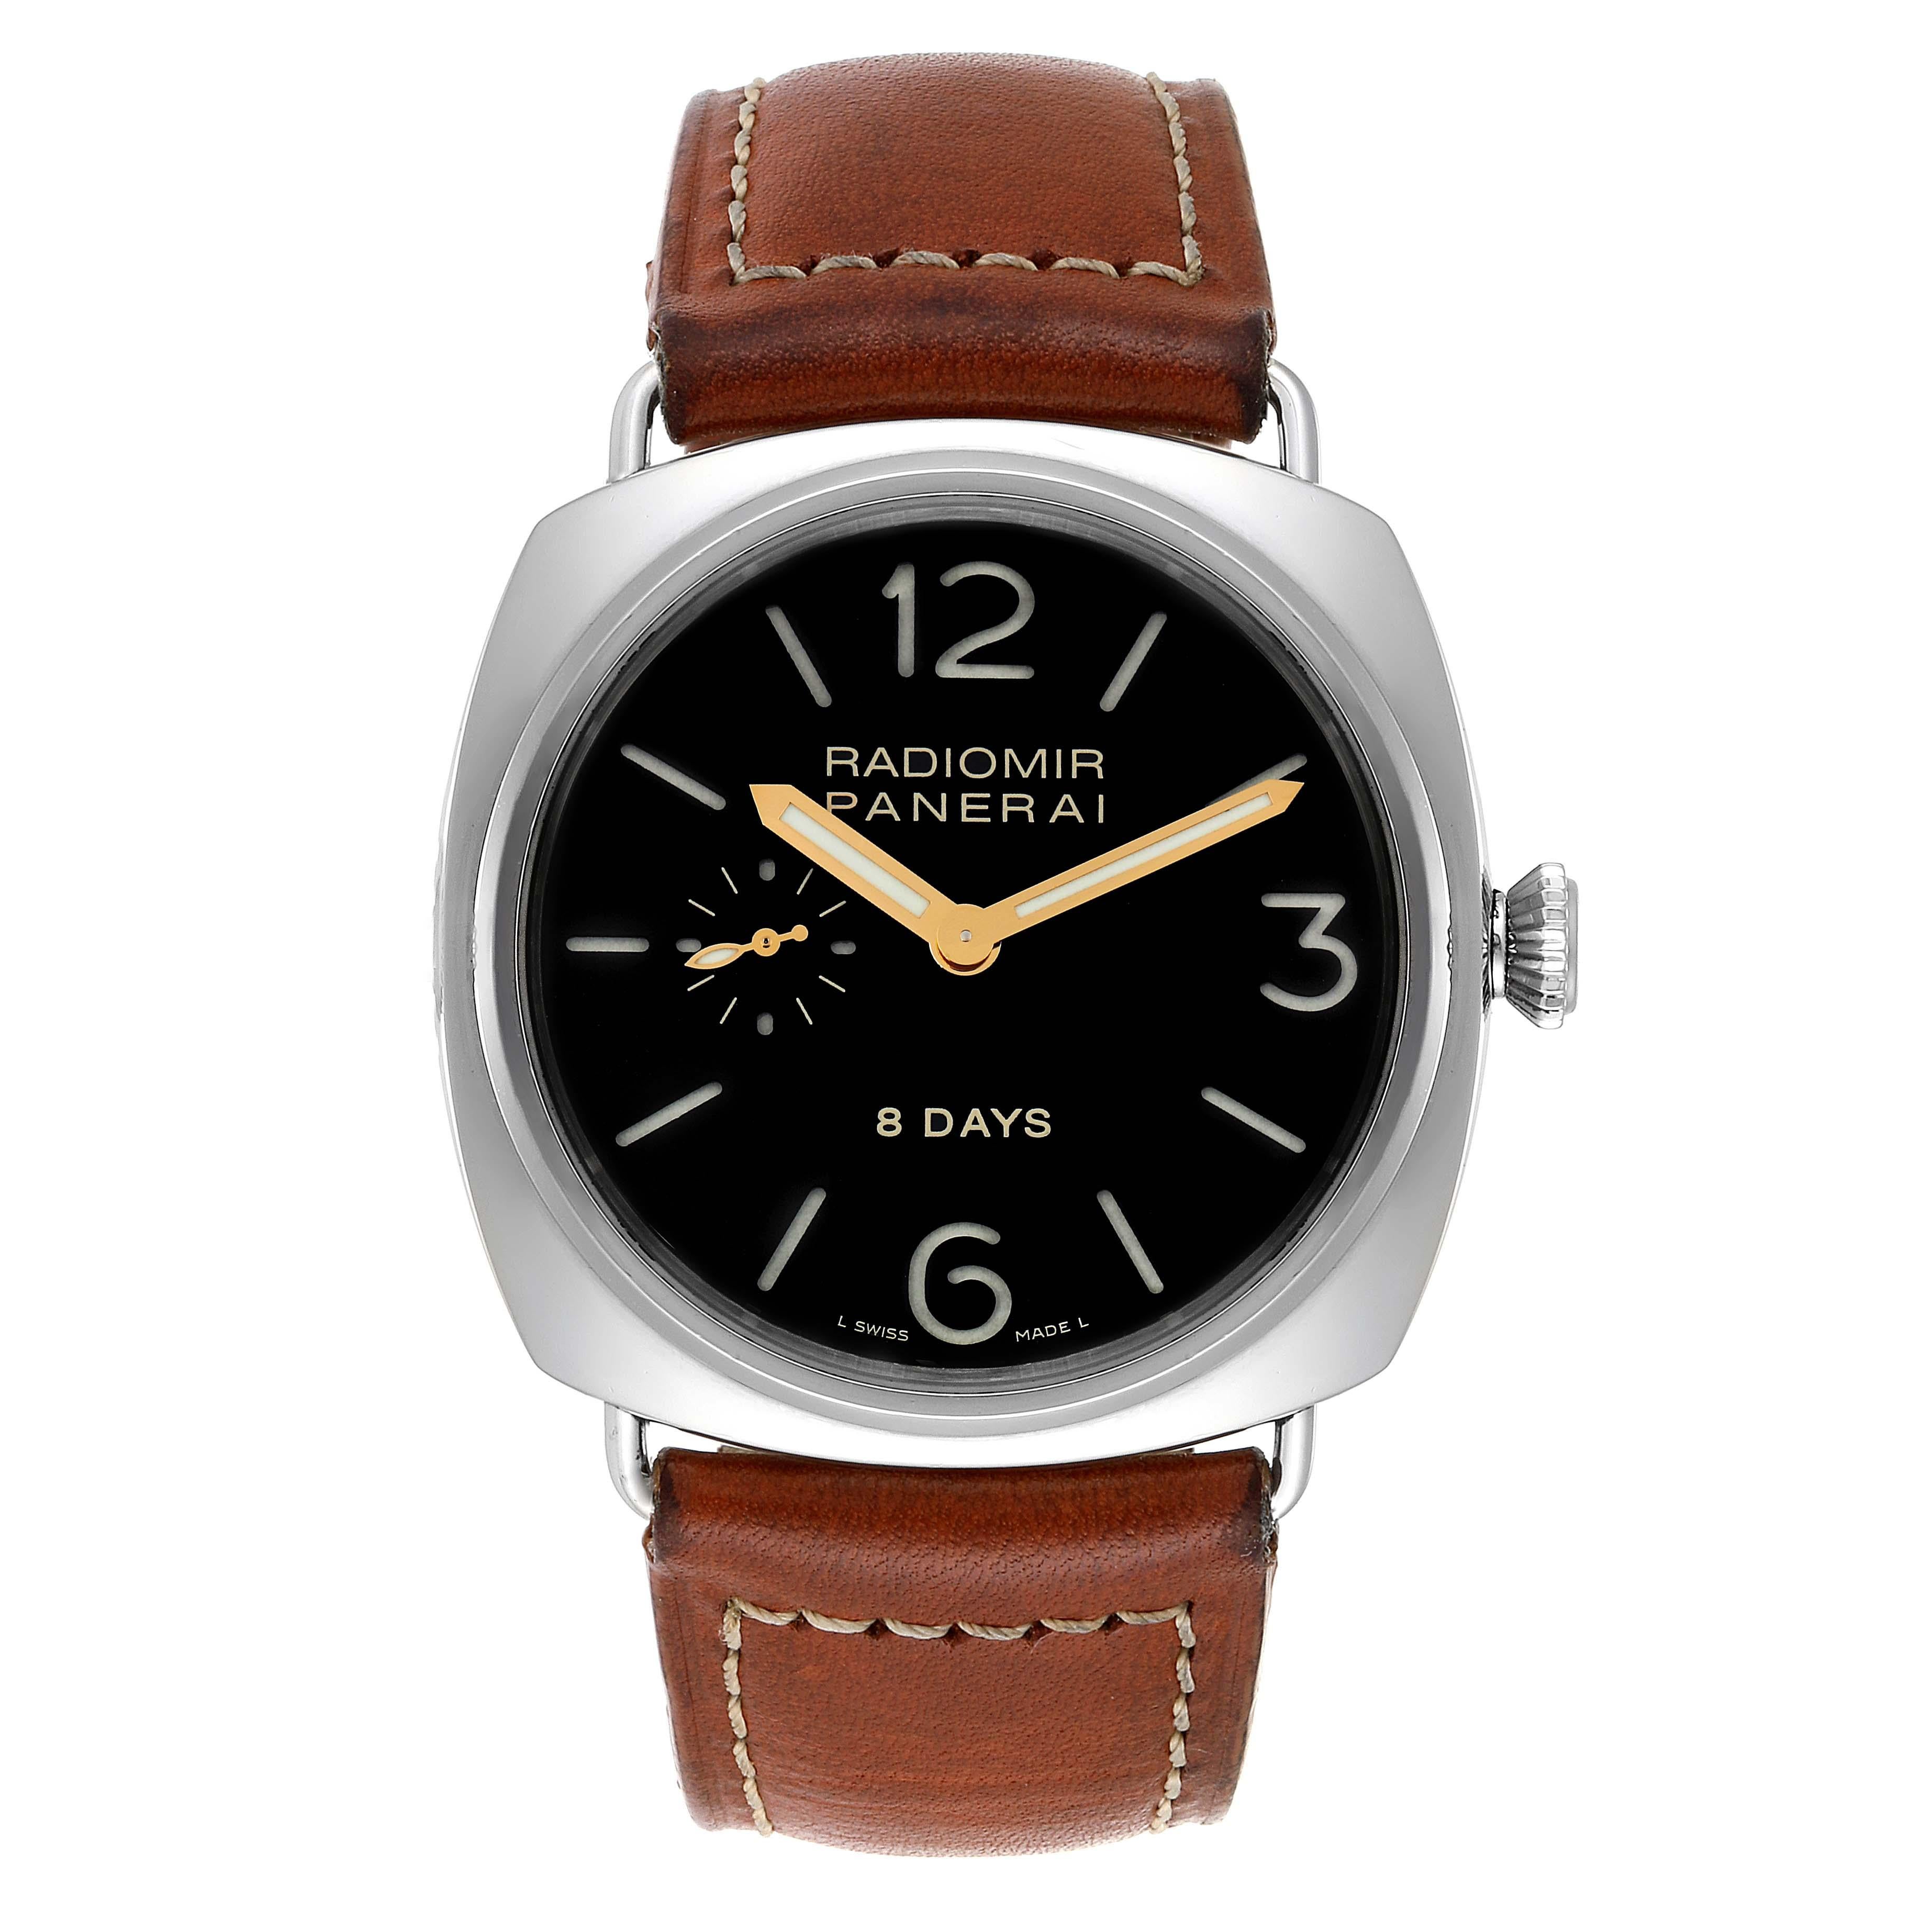 Panerai Radiomir 8 Days 45mm Steel Mens Watch PAM190 PAM00190. Manual winding movement. Two part cushion shaped polished stainless steel case 45.0 mm in diameter. Case thickness 15.2 mm . Exhibition sapphire crystal caseback. Stainless steel sloped